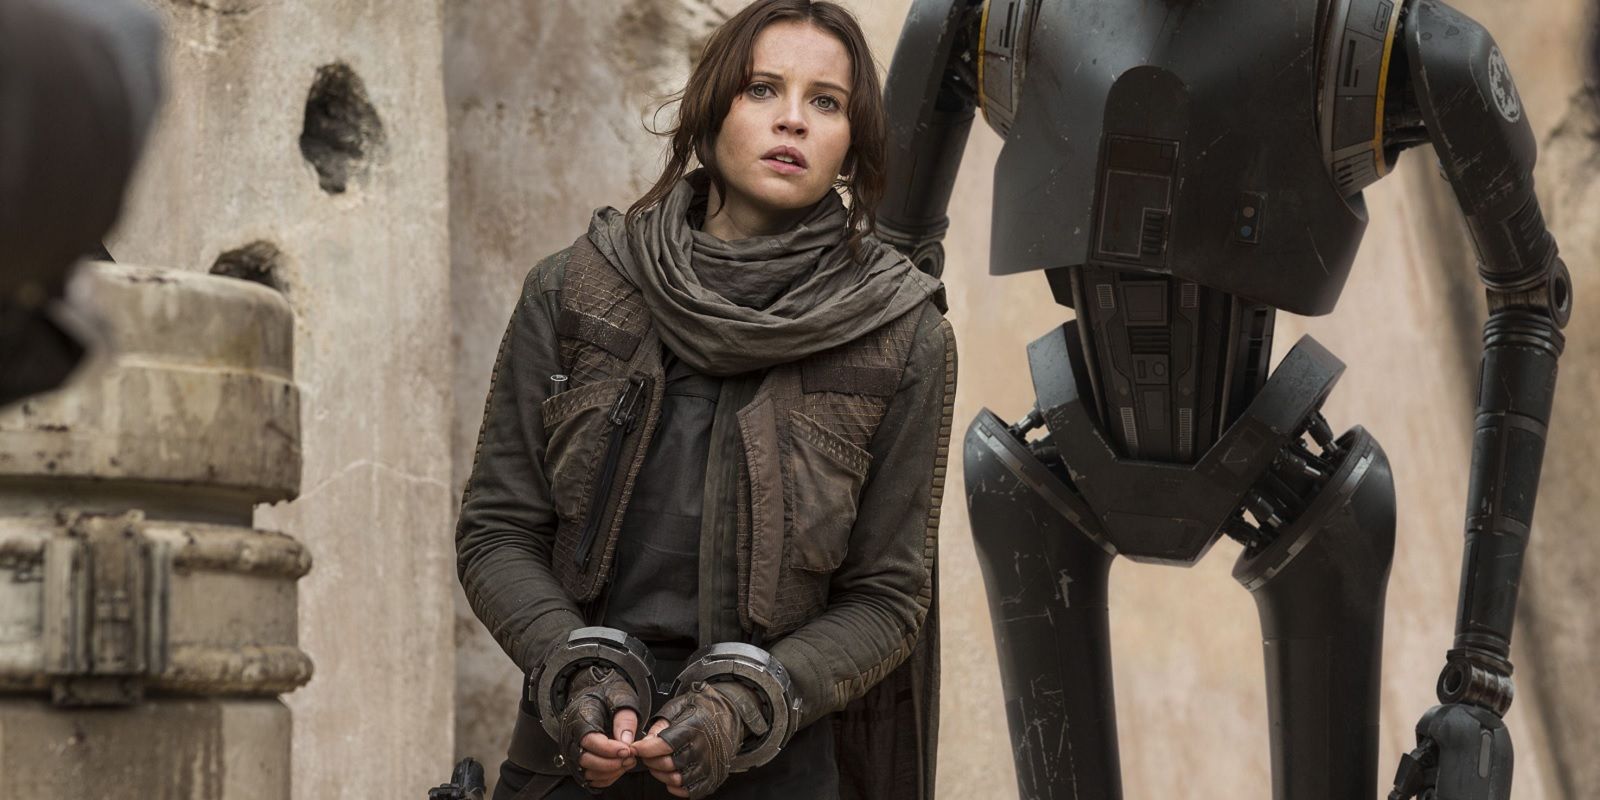 Star Wars Rogue One - Jyn and K-2SO